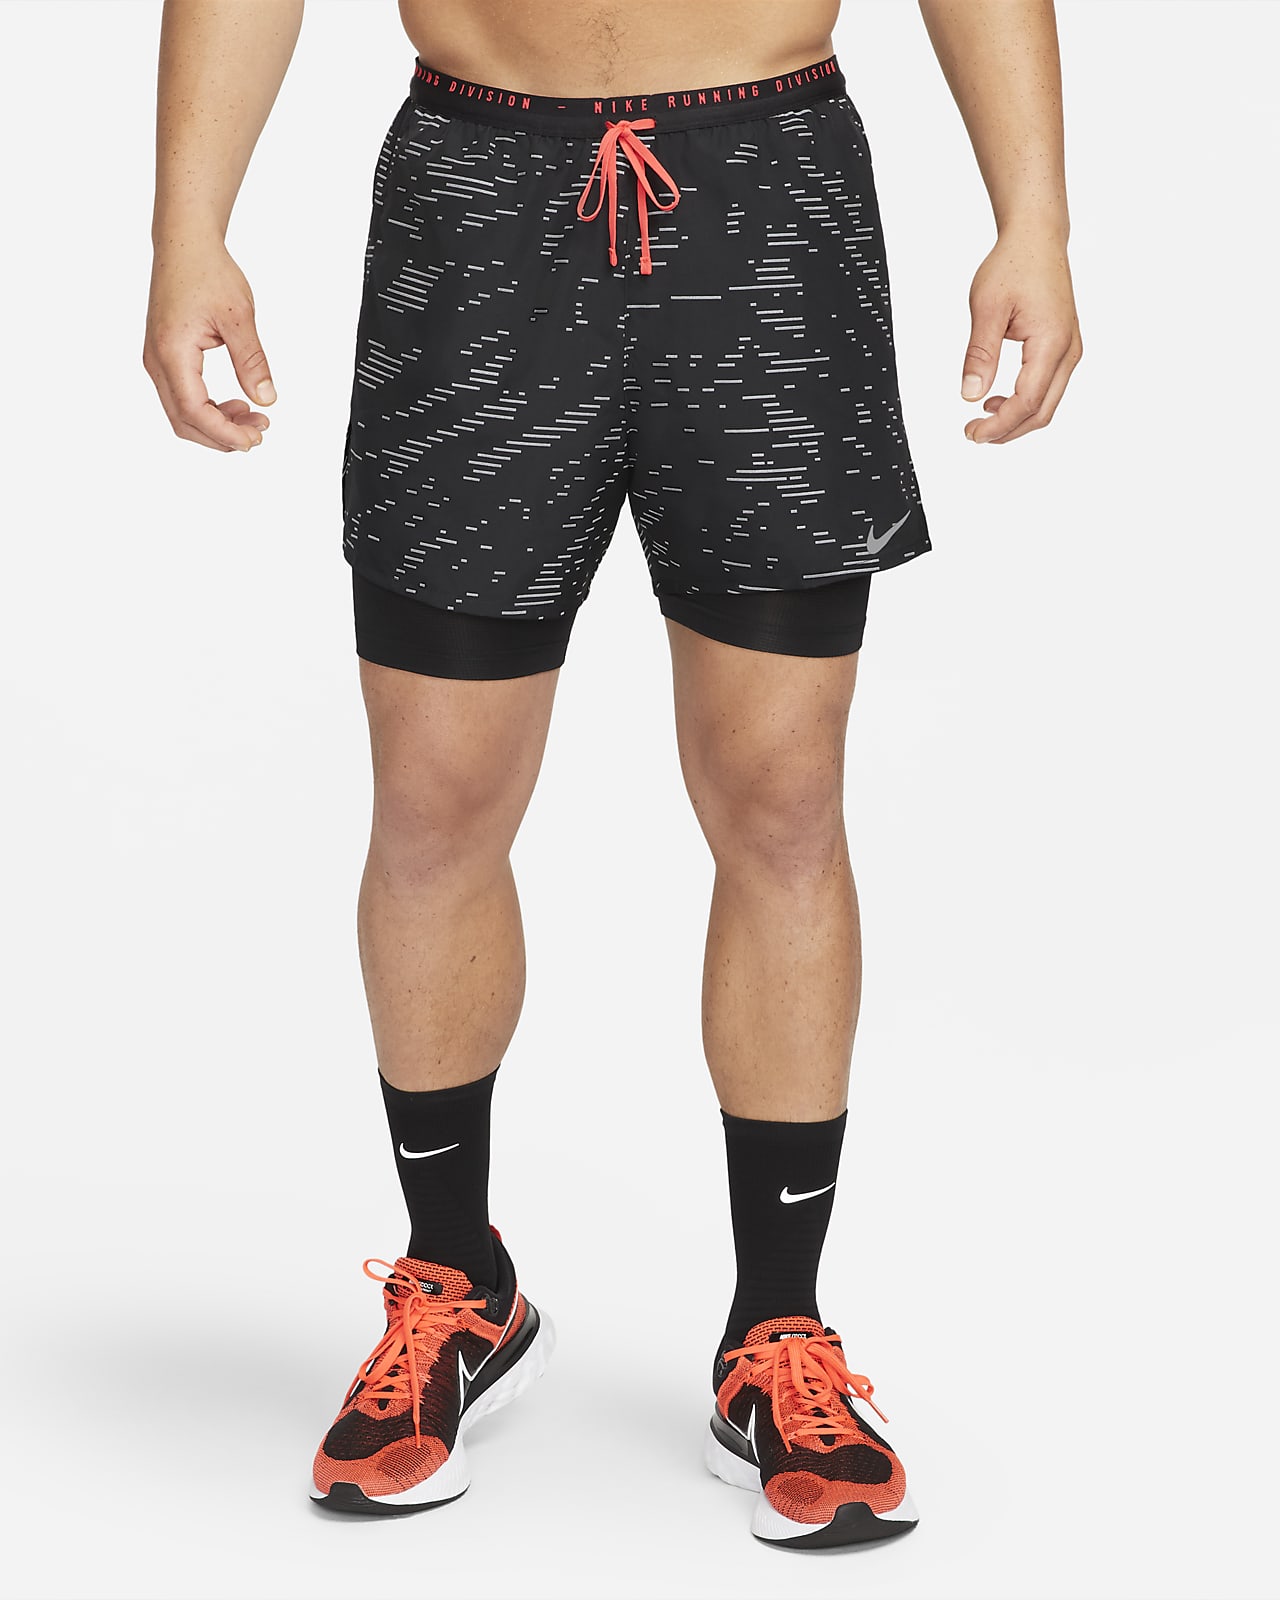 Nike Dri-FIT Division Stride Men's 2-In-1 13cm (approx.) Running Shorts.